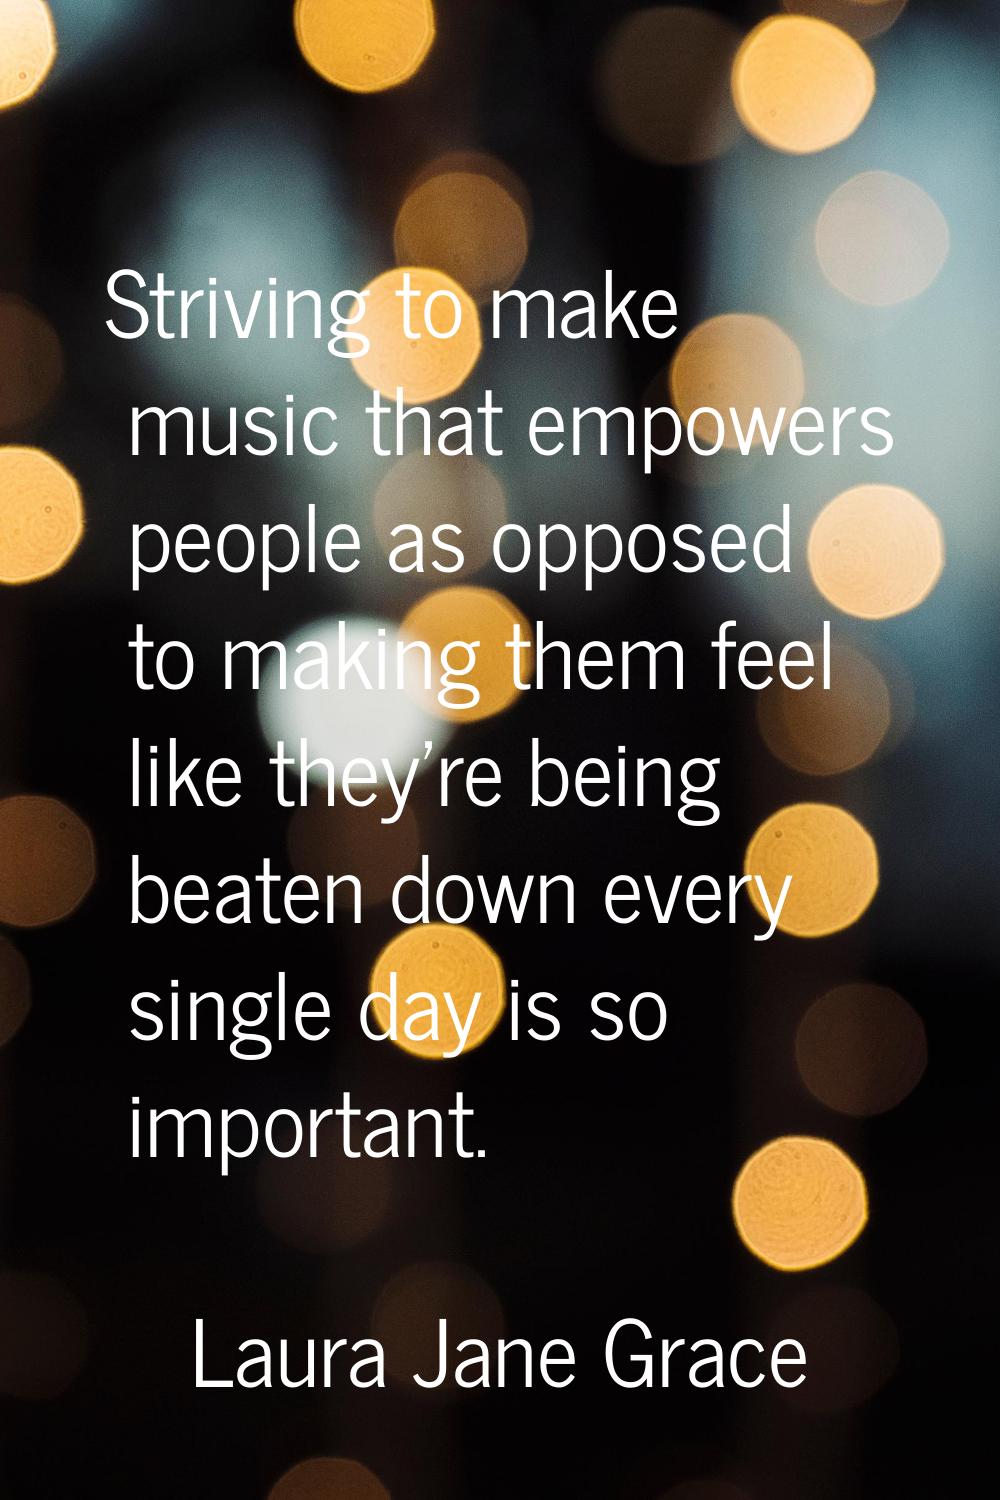 Striving to make music that empowers people as opposed to making them feel like they're being beate